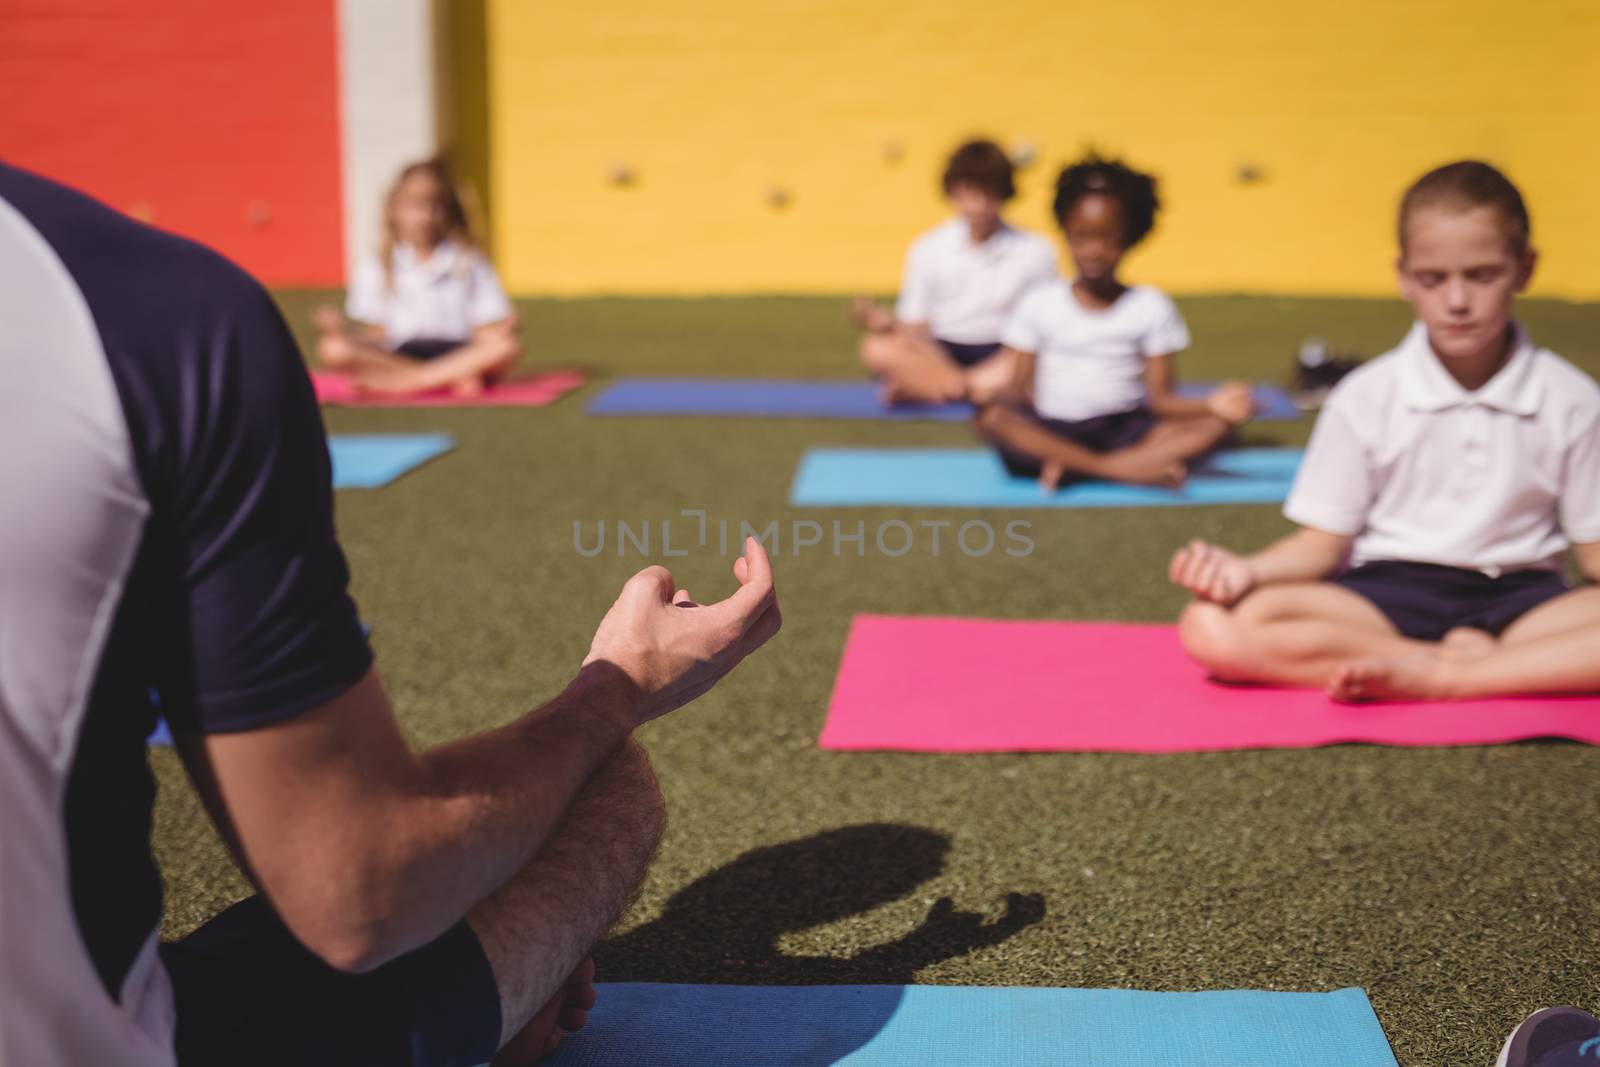 Coach and schoolkids practicing yoga by Wavebreakmedia